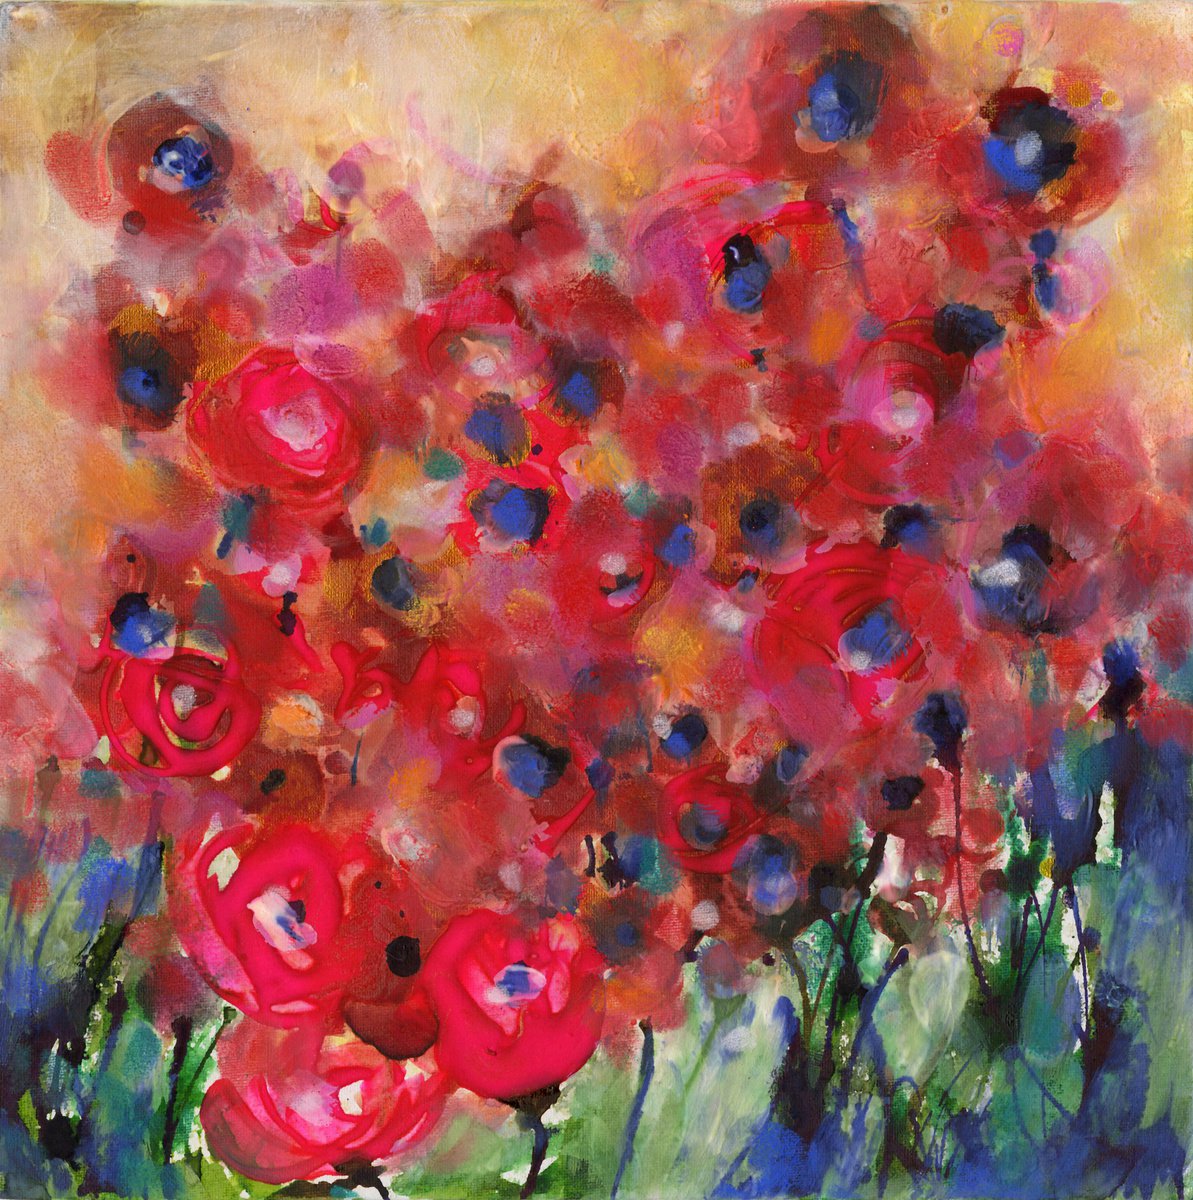 A Day In The Garden 5 - Flower Painting by Kathy Morton Stanion by Kathy Morton Stanion